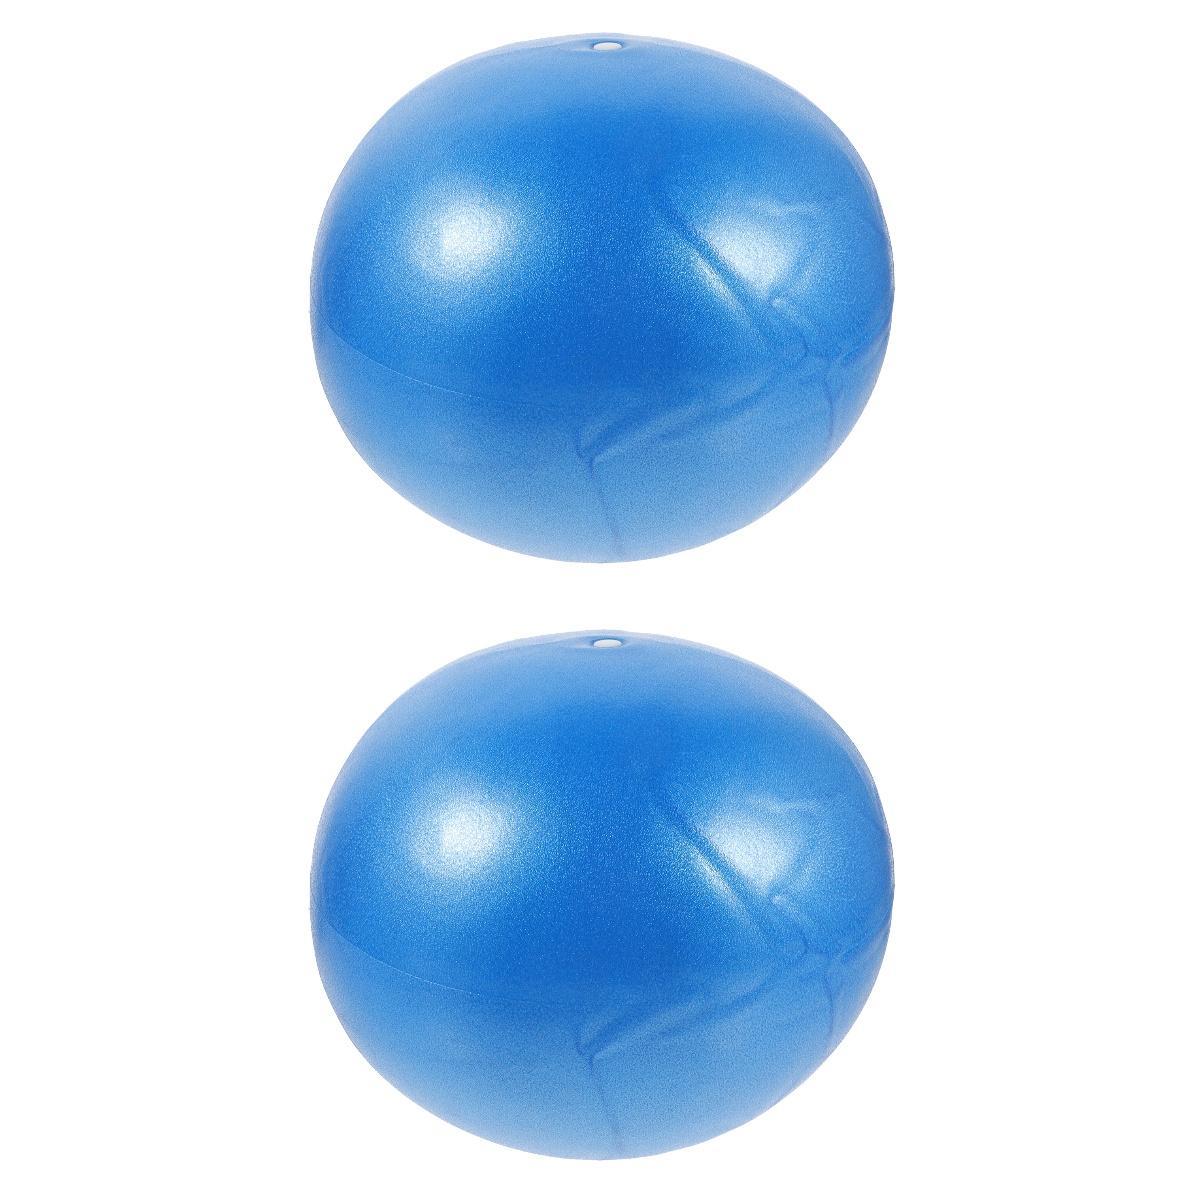 Set 2 Stability Ball Balance Pilates Pvc Fittings Mini Accessories Exercise Fitness